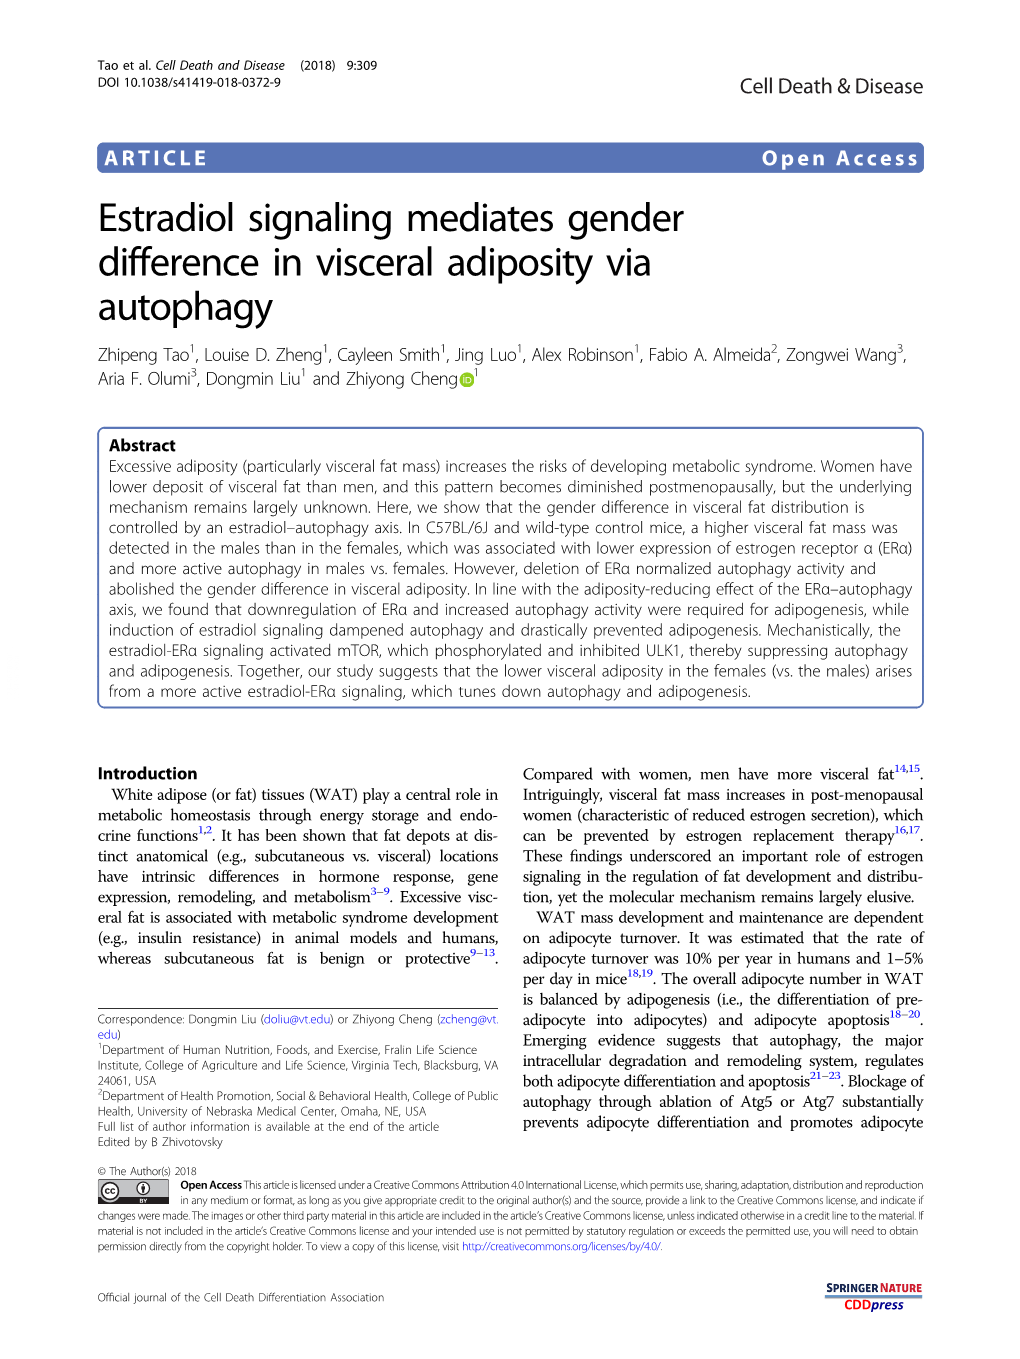 Estradiol Signaling Mediates Gender Difference in Visceral Adiposity Via Autophagy Zhipeng Tao1, Louise D